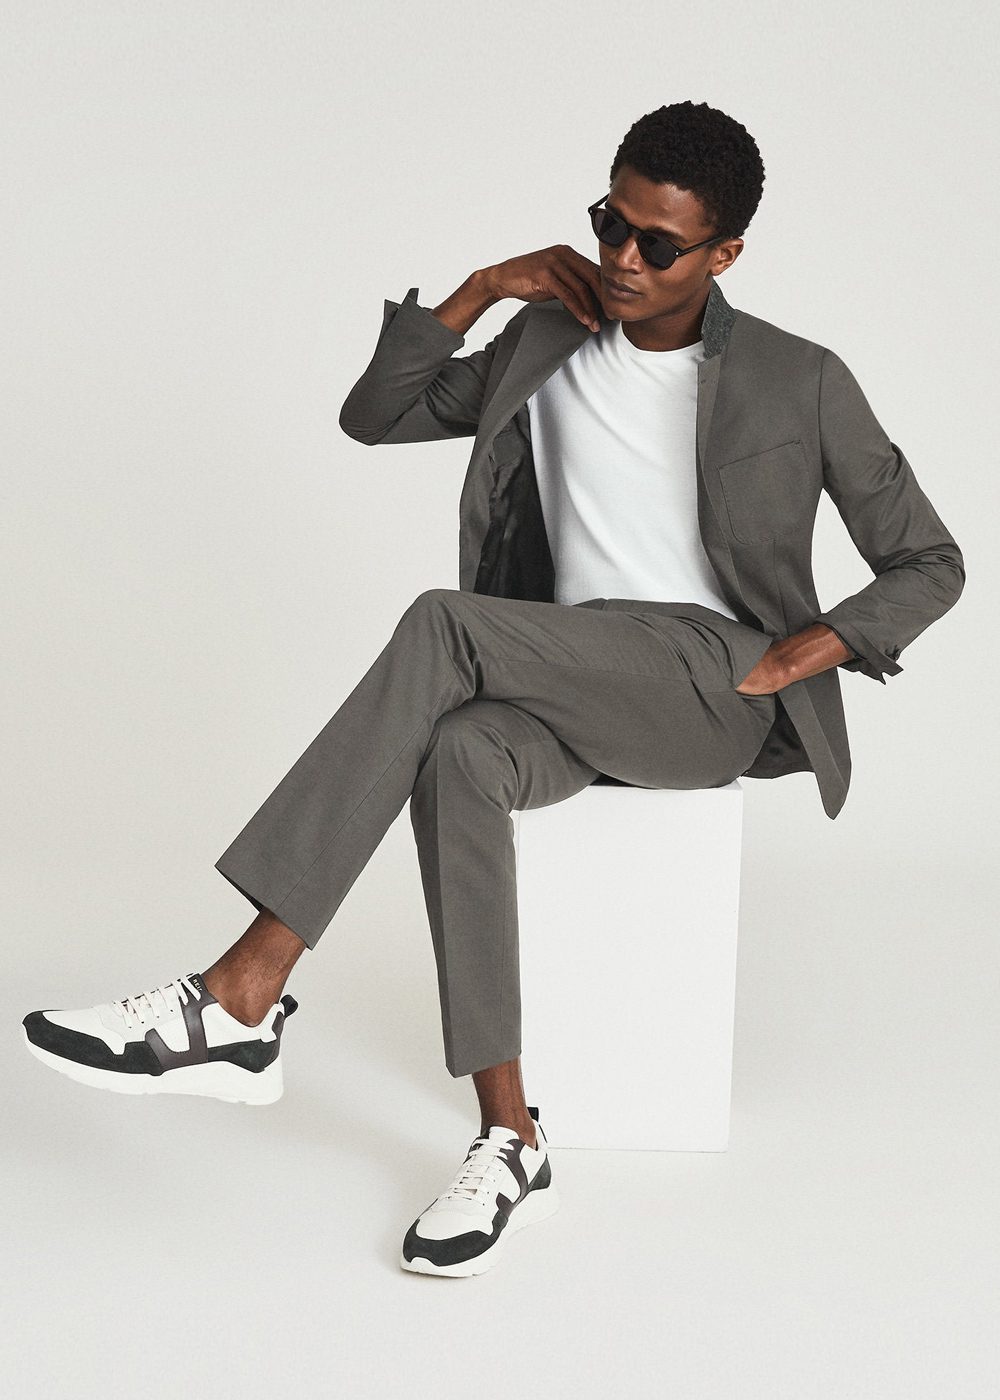 risk surely To read How to Wear a Suit with Sneakers in 2022: A Visual Guide